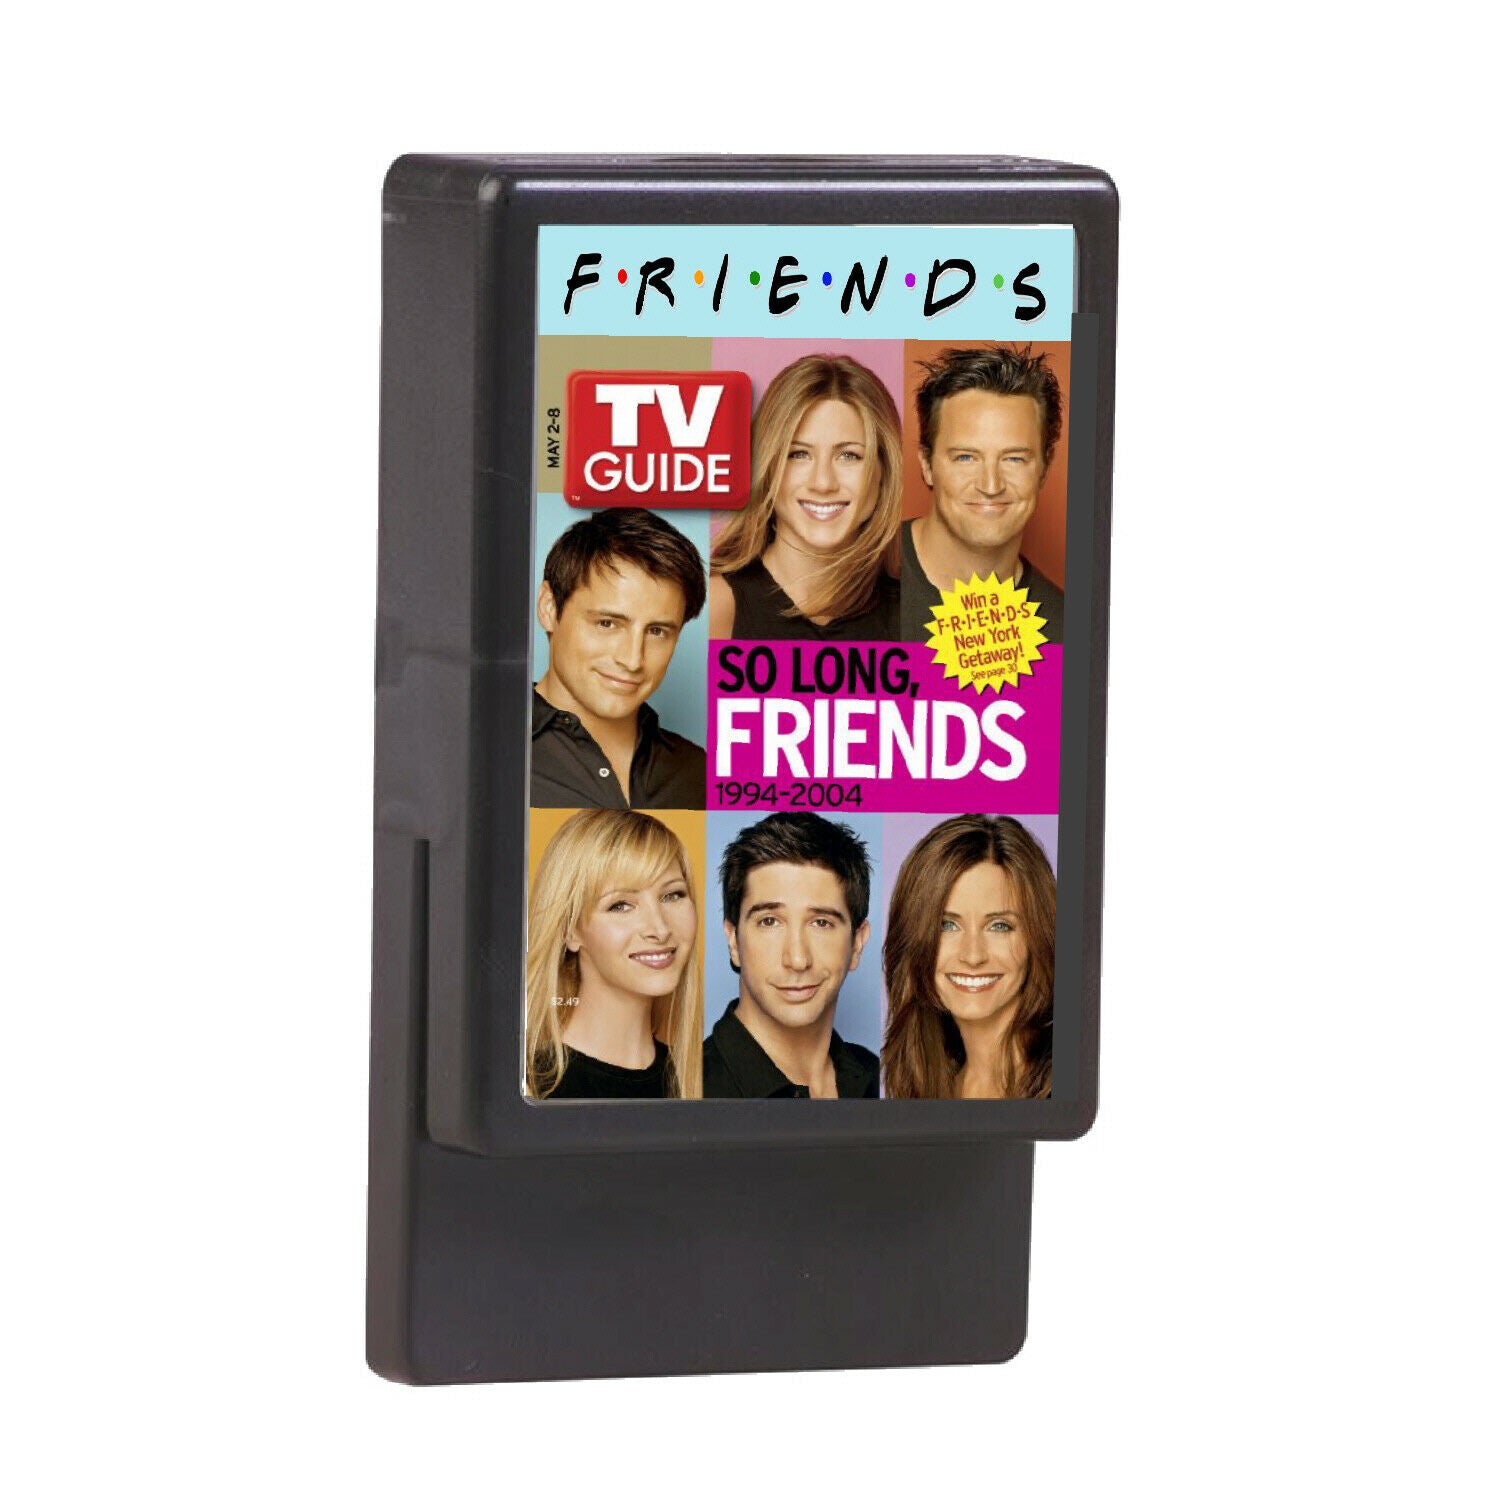 FRIENDS show TV Guide Magnetic Display Clip Big 4 inches